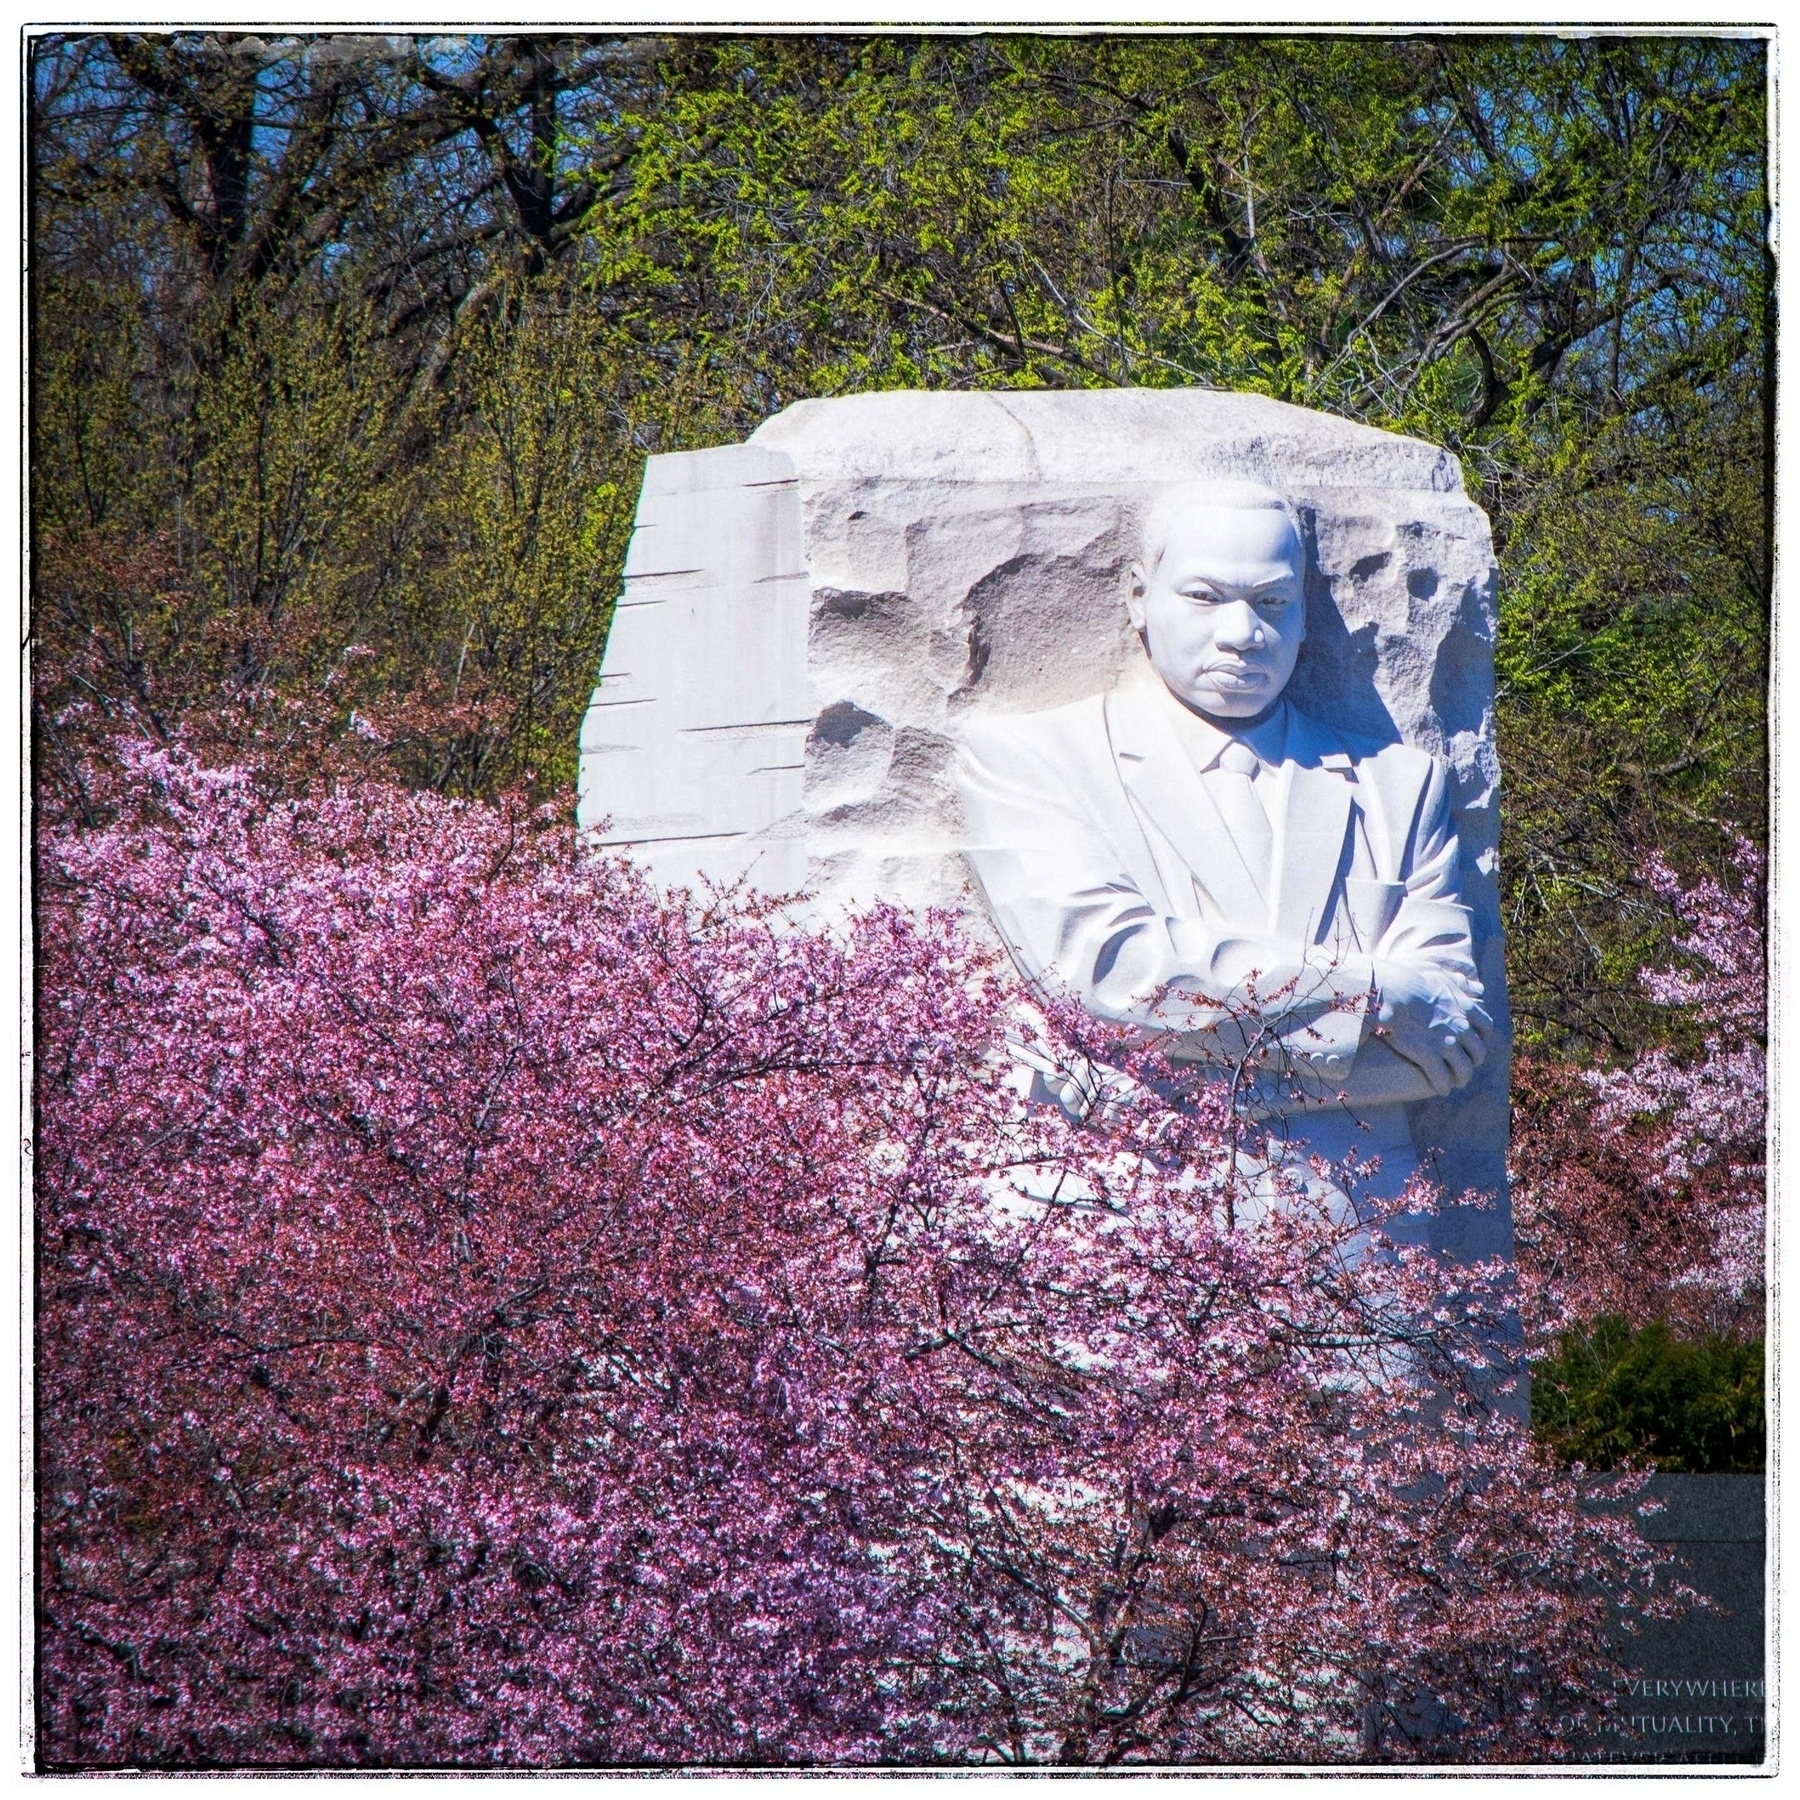 Bright pink cherry blossoms framing the sculpture of Martin Luther King Jr. in Washington D.C.  Taken April 4,2018